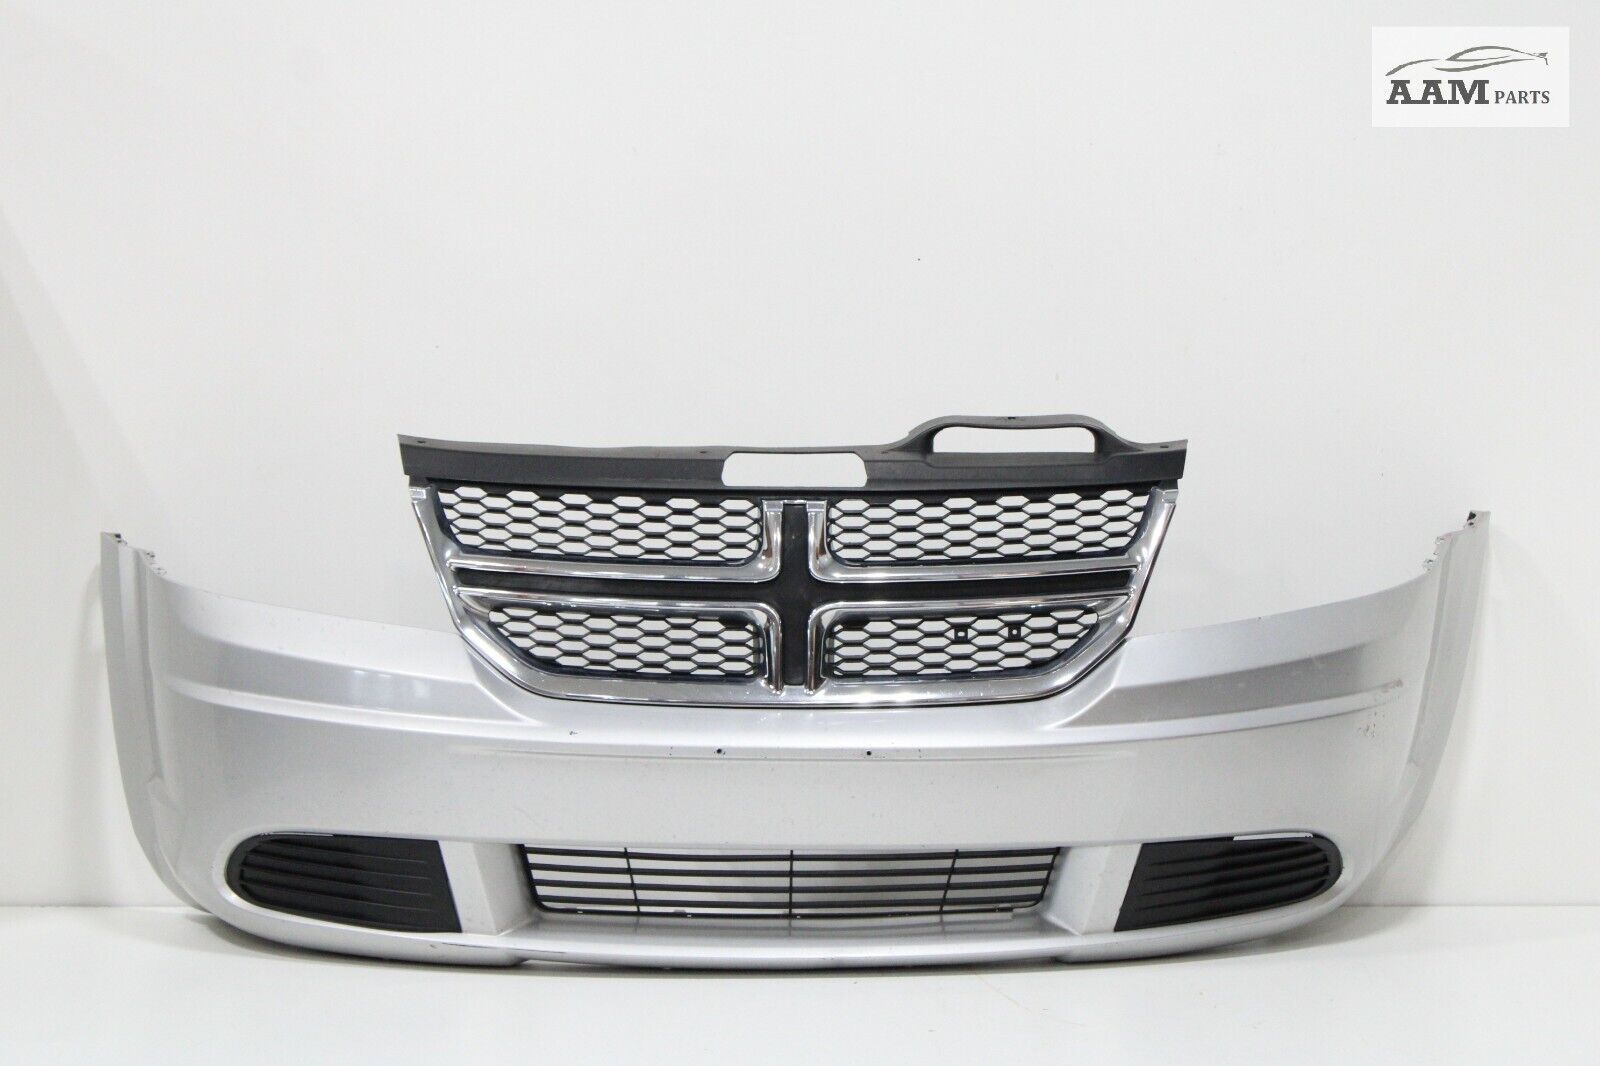 2011-2019 DODGE JOURNEY FRONT BUMPER COVER BRIGHT SILVER METALLIC W/ GRILLE OEM